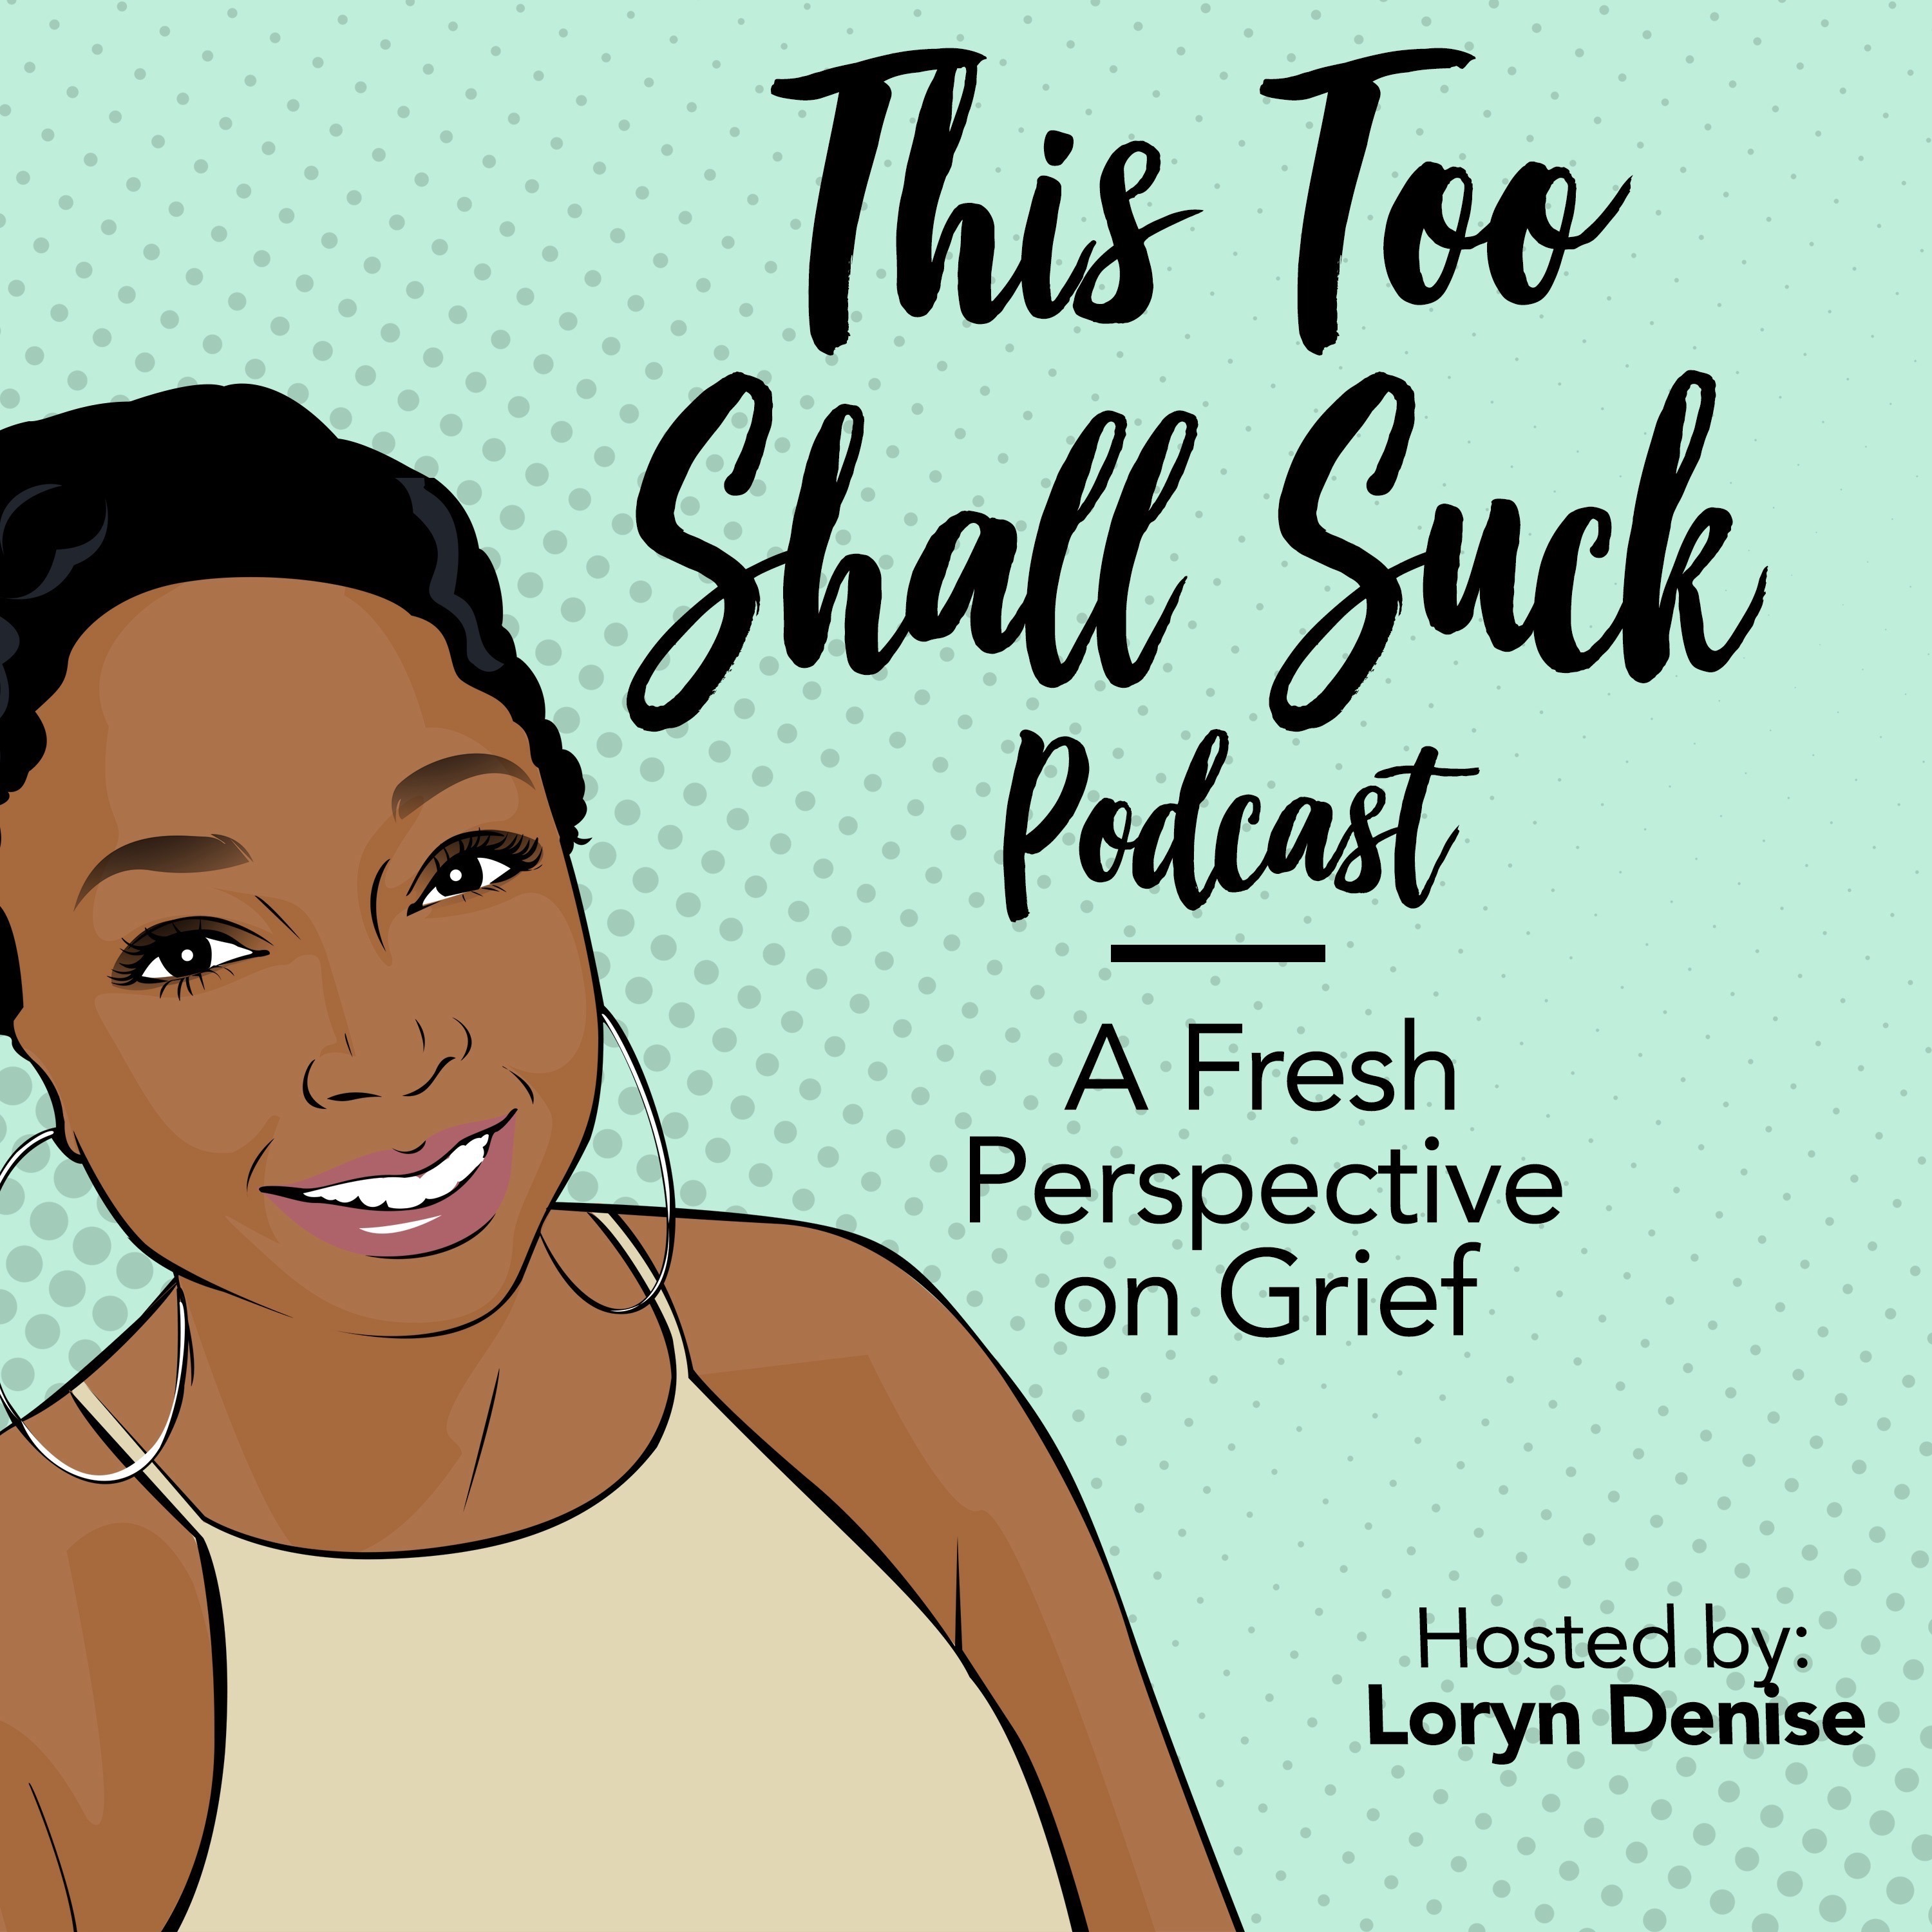 This Too Shall Suck Podcast: A Fresh Perspective on Grief